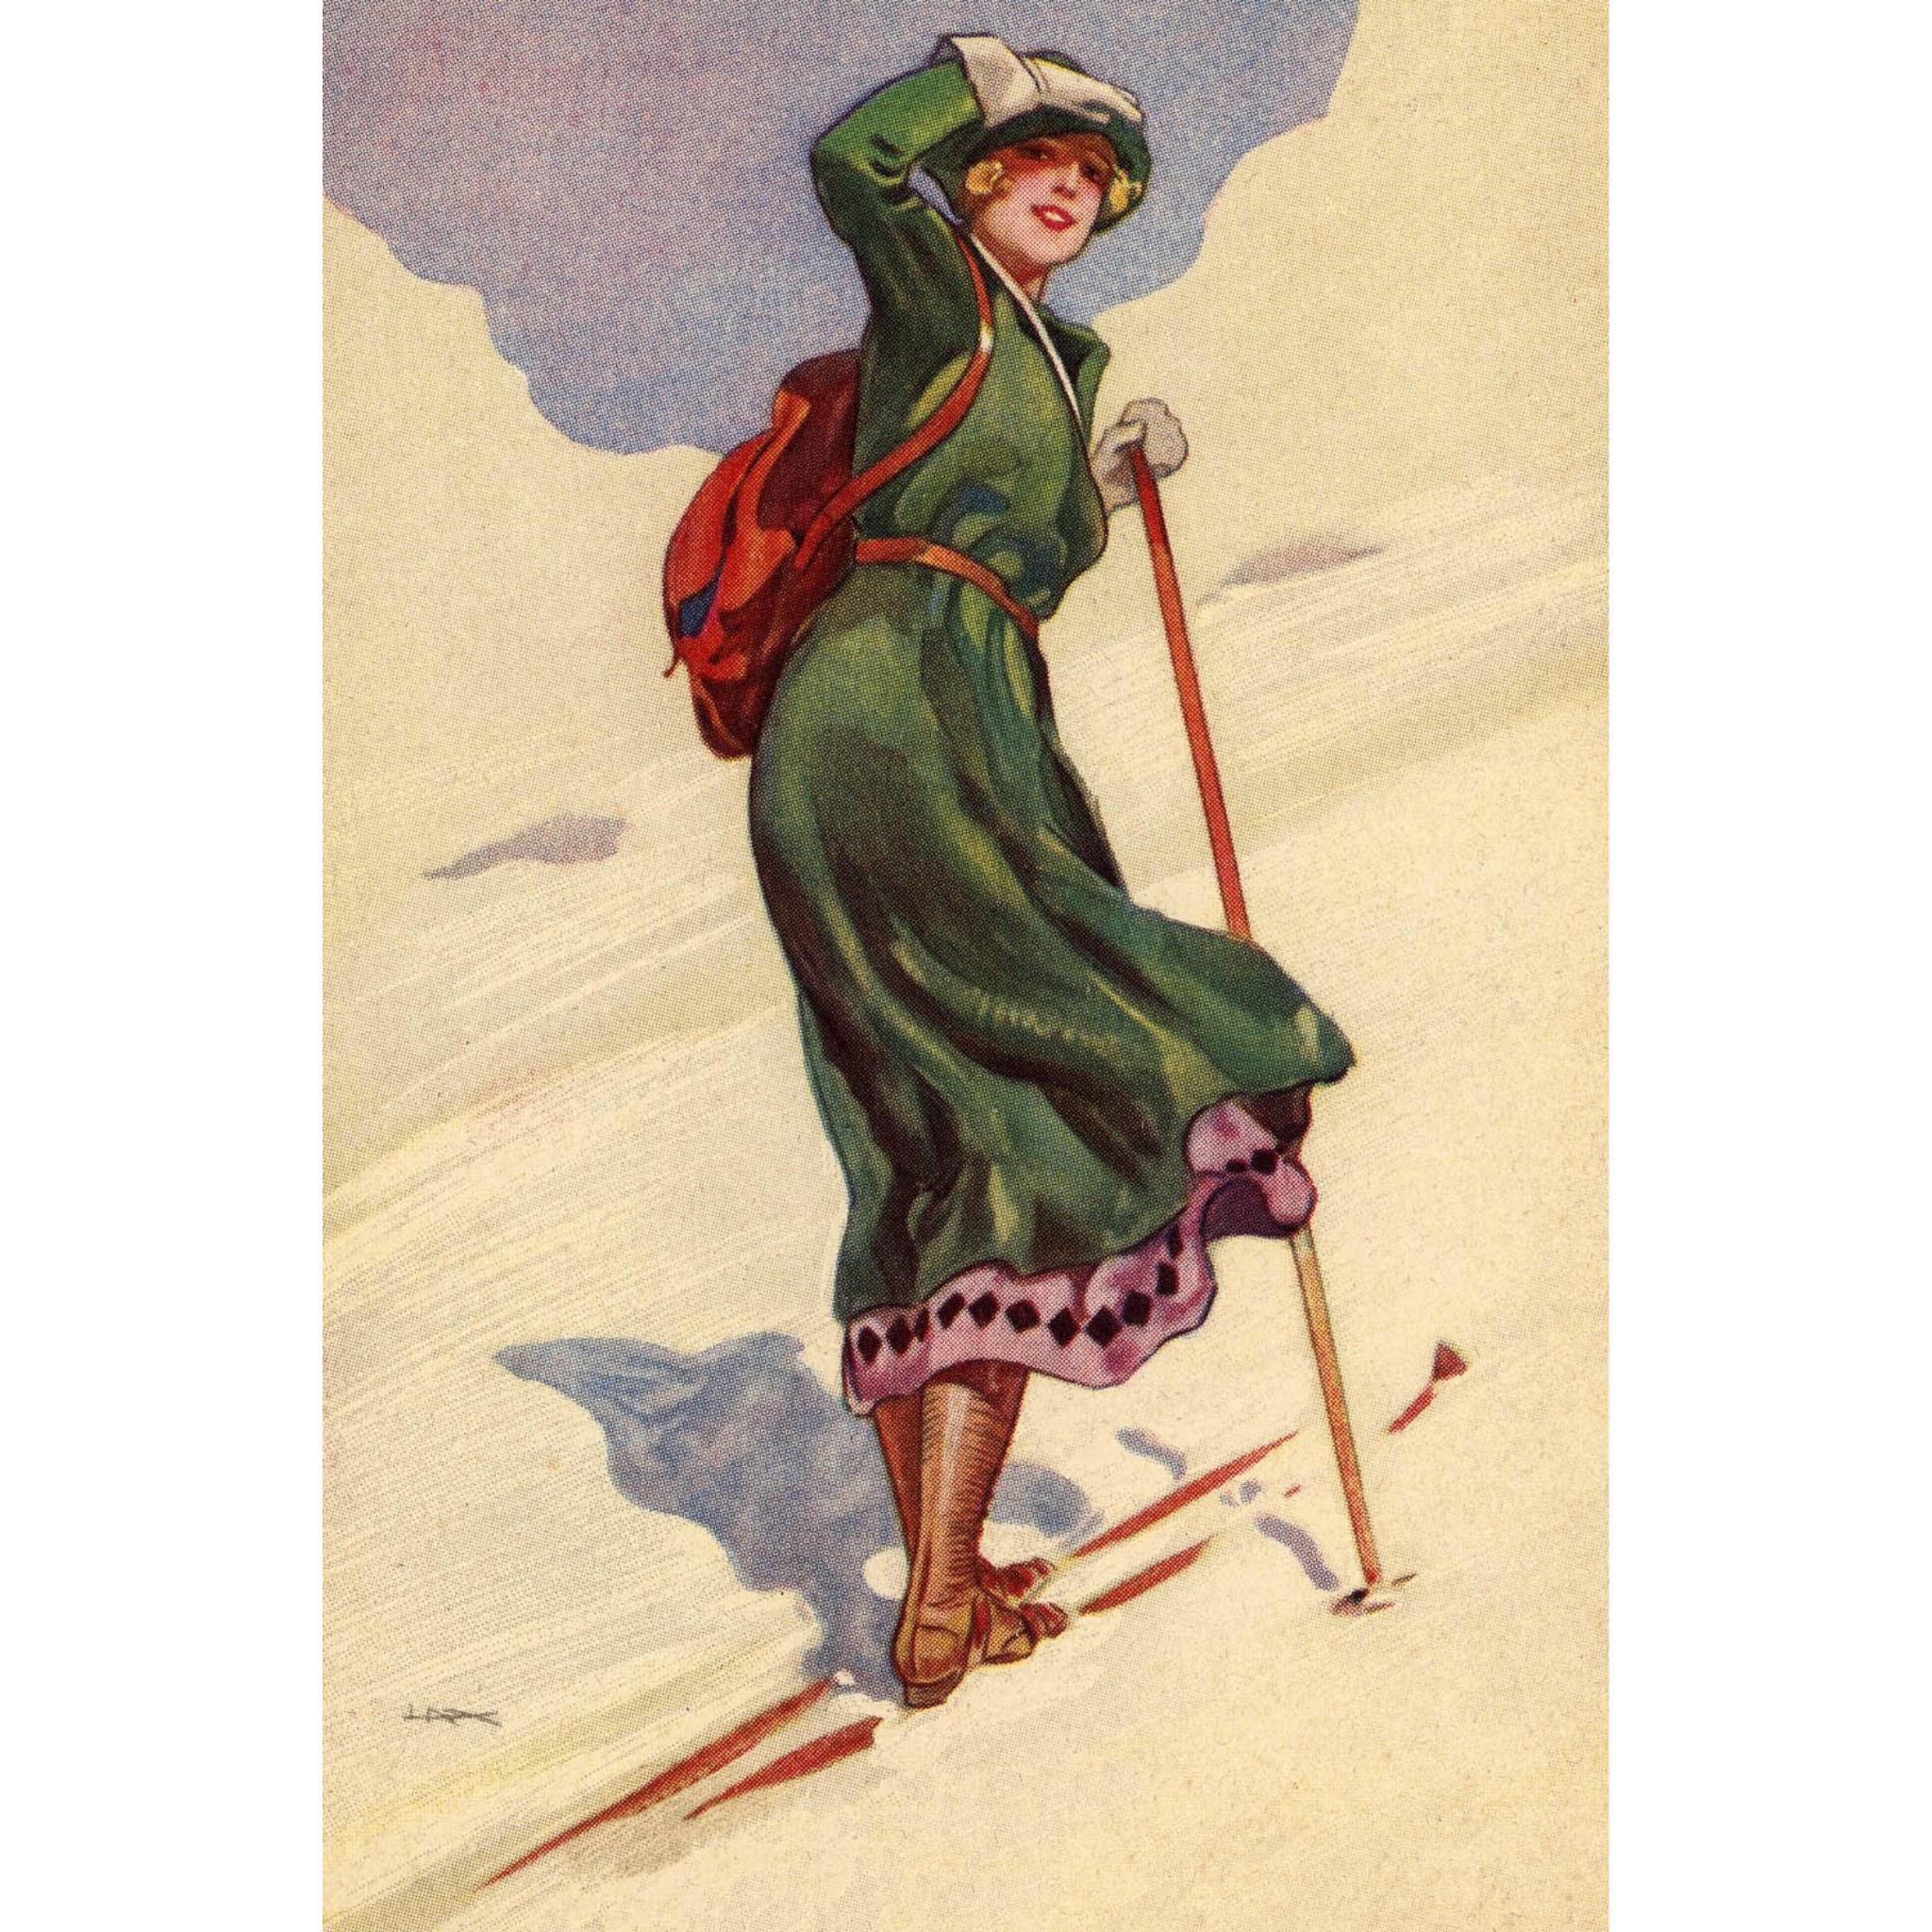 Woman On Skis in Green Skirt - ca. 1925 Lithograph